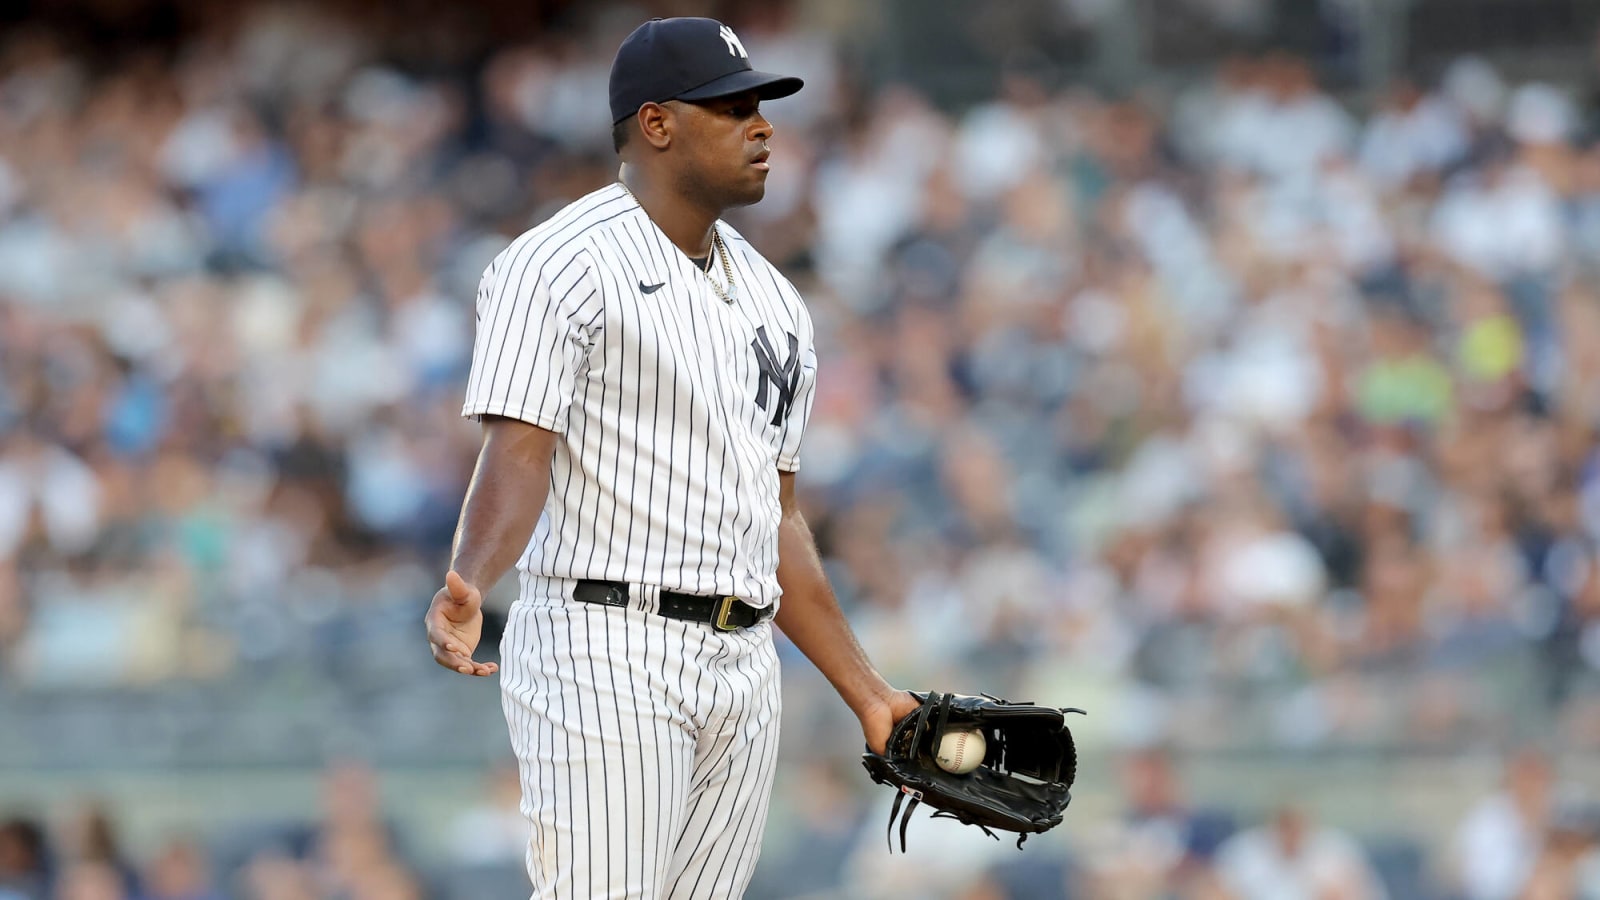 The Yankees have a major starting pitching problem